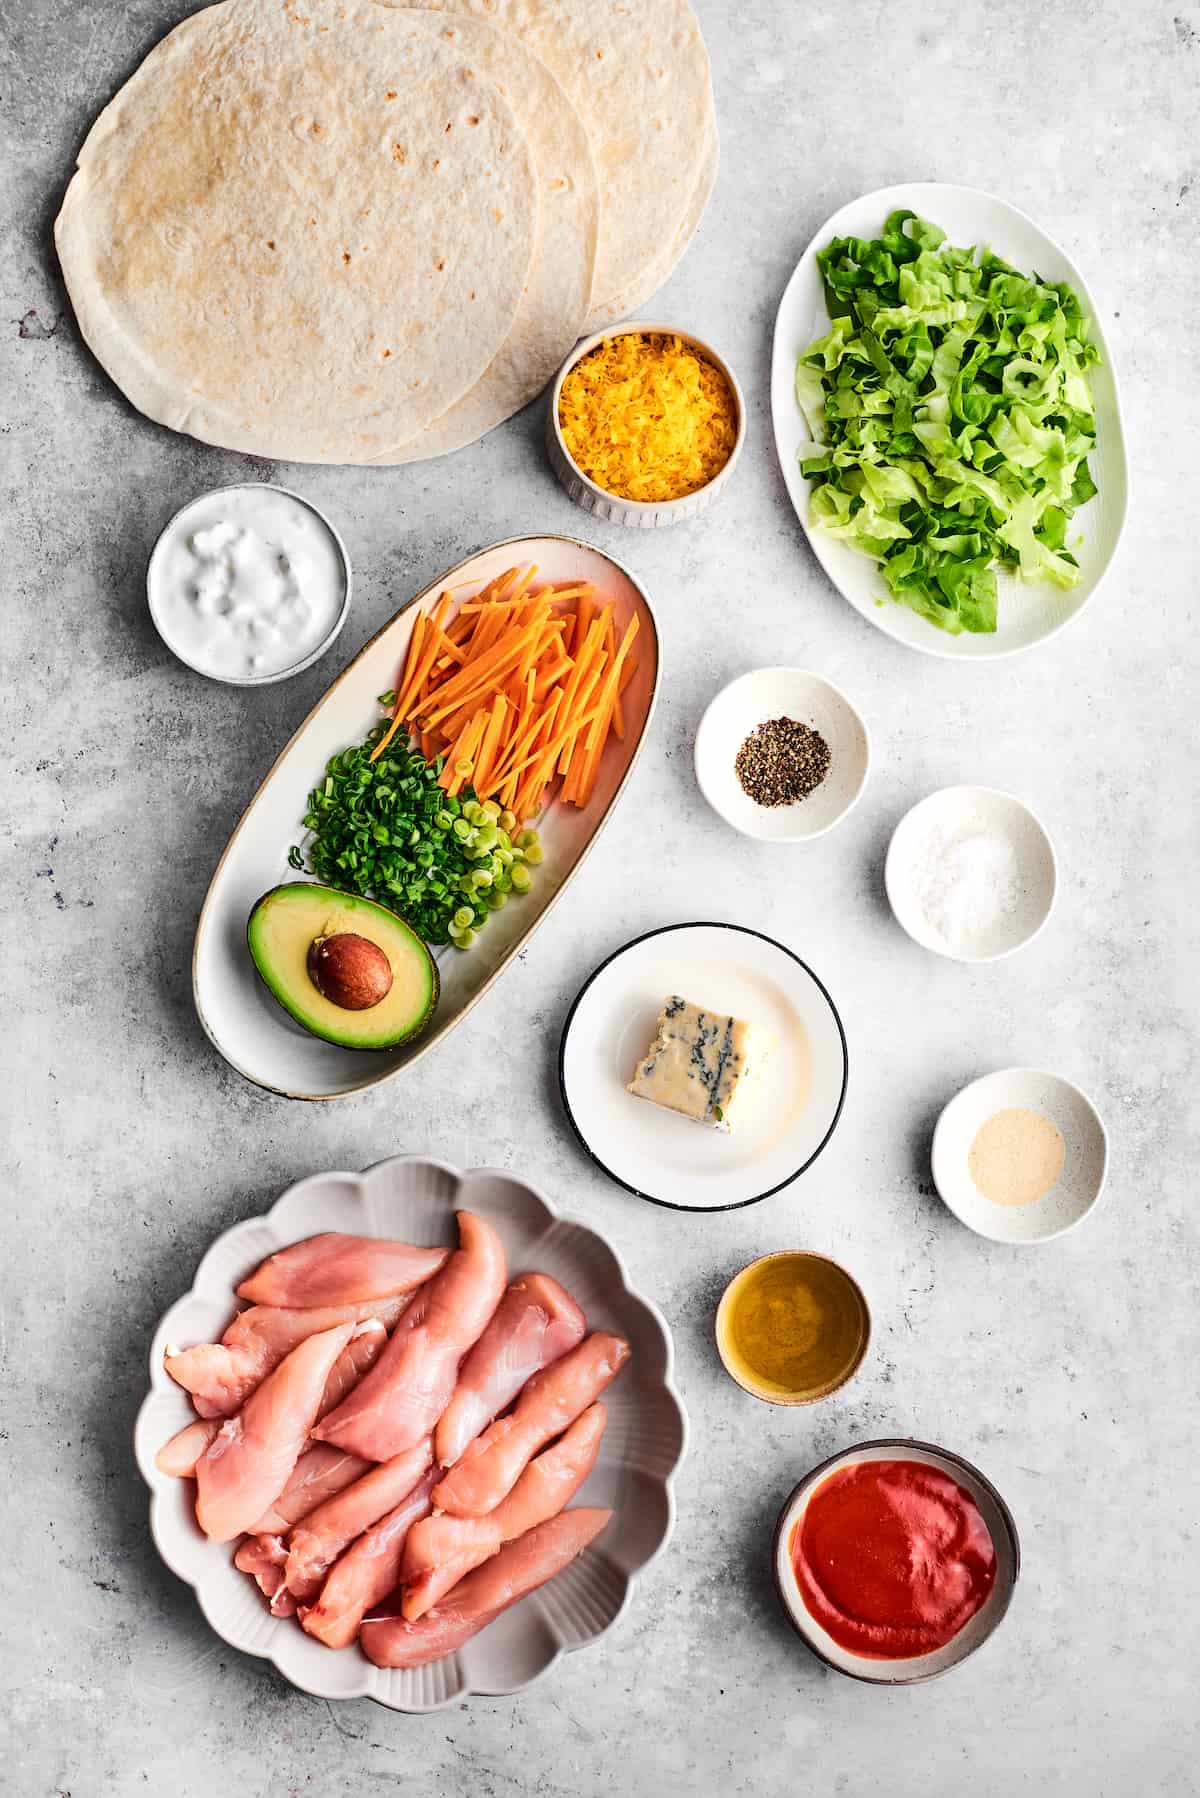 The ingredients for buffalo chicken wrap are shown portioned out: chicken tenders, olive oil, salt and pepper, garlic powder, hot sauce, ranch dressing, avocado green onions, carrots, tortillas, cheddar cheese, and blue cheese.